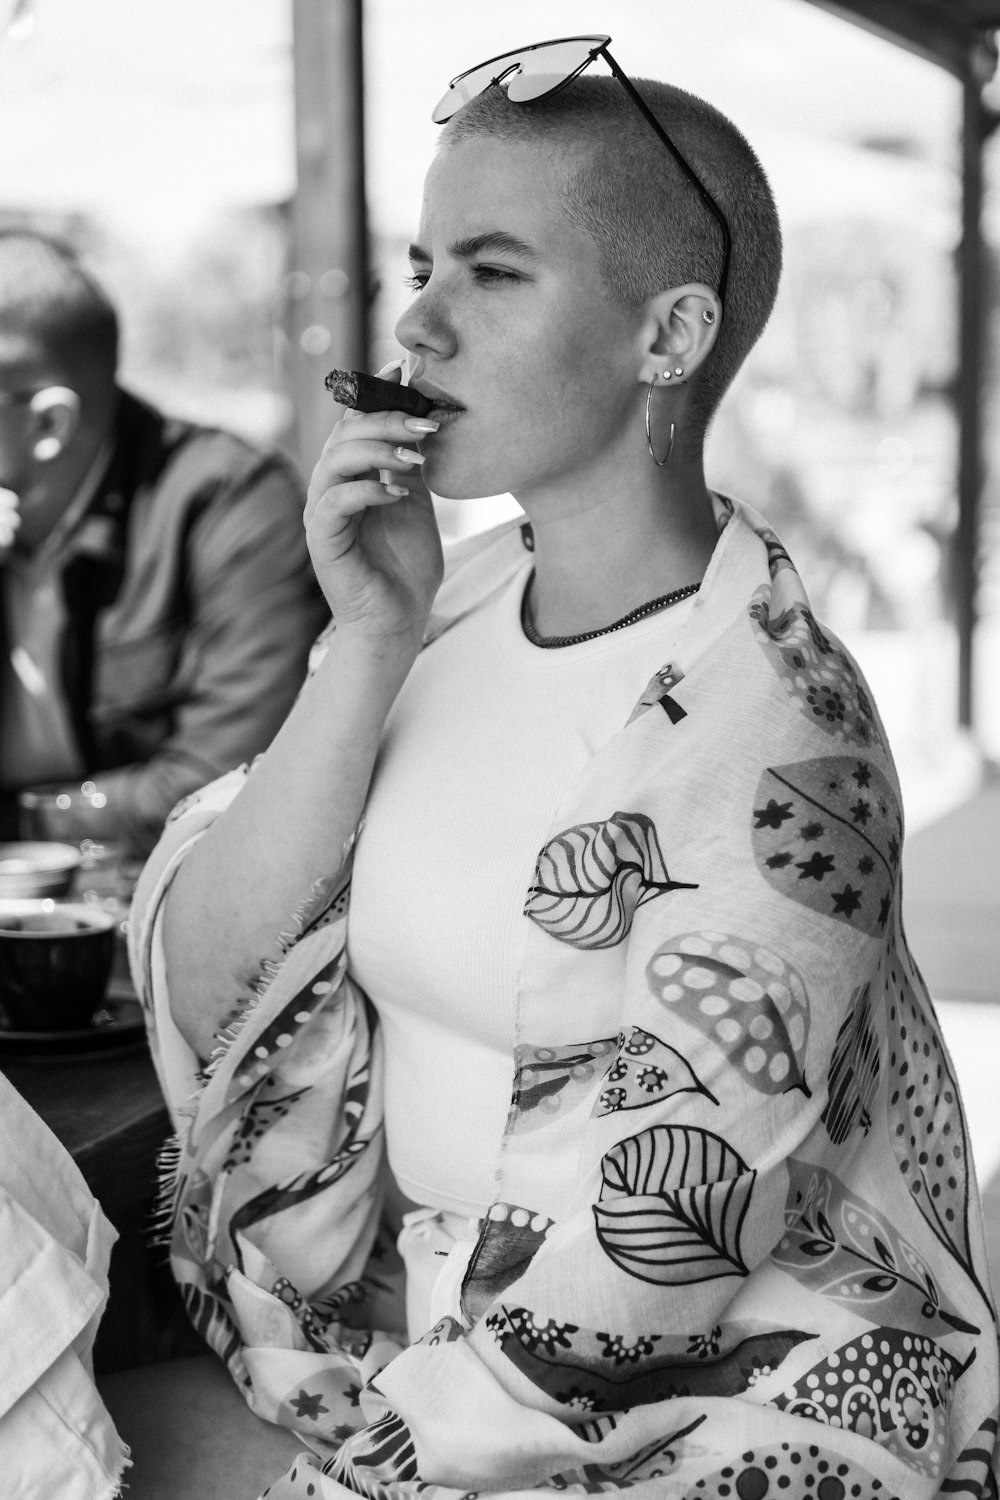 a woman with a shaved head eating a donut